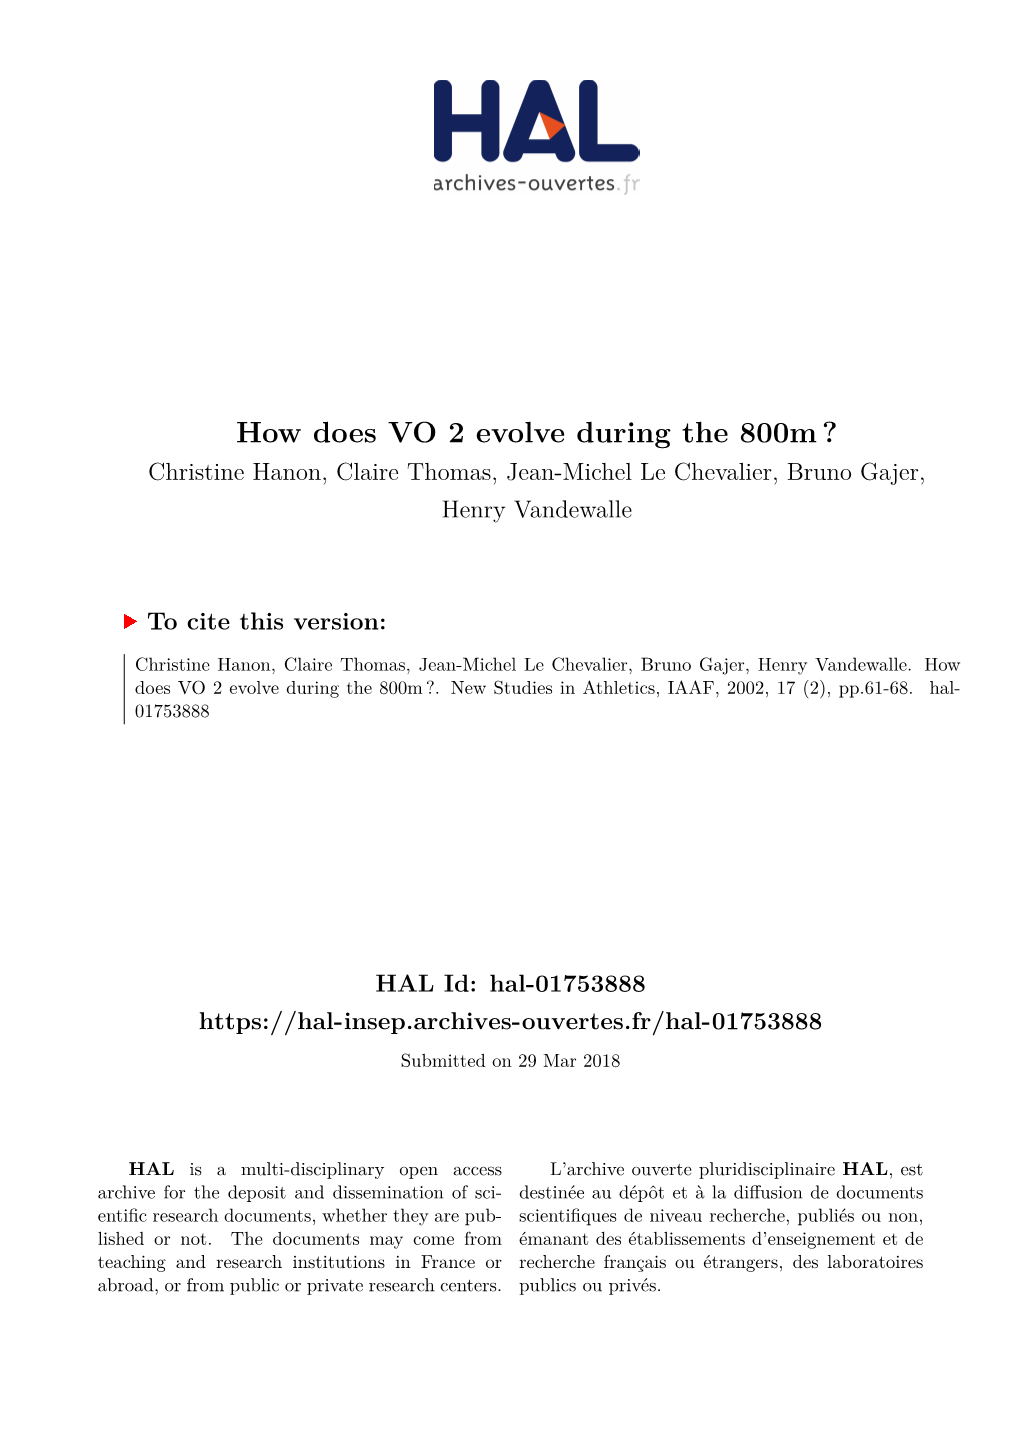 How Does VO 2 Evolve During the 800M?